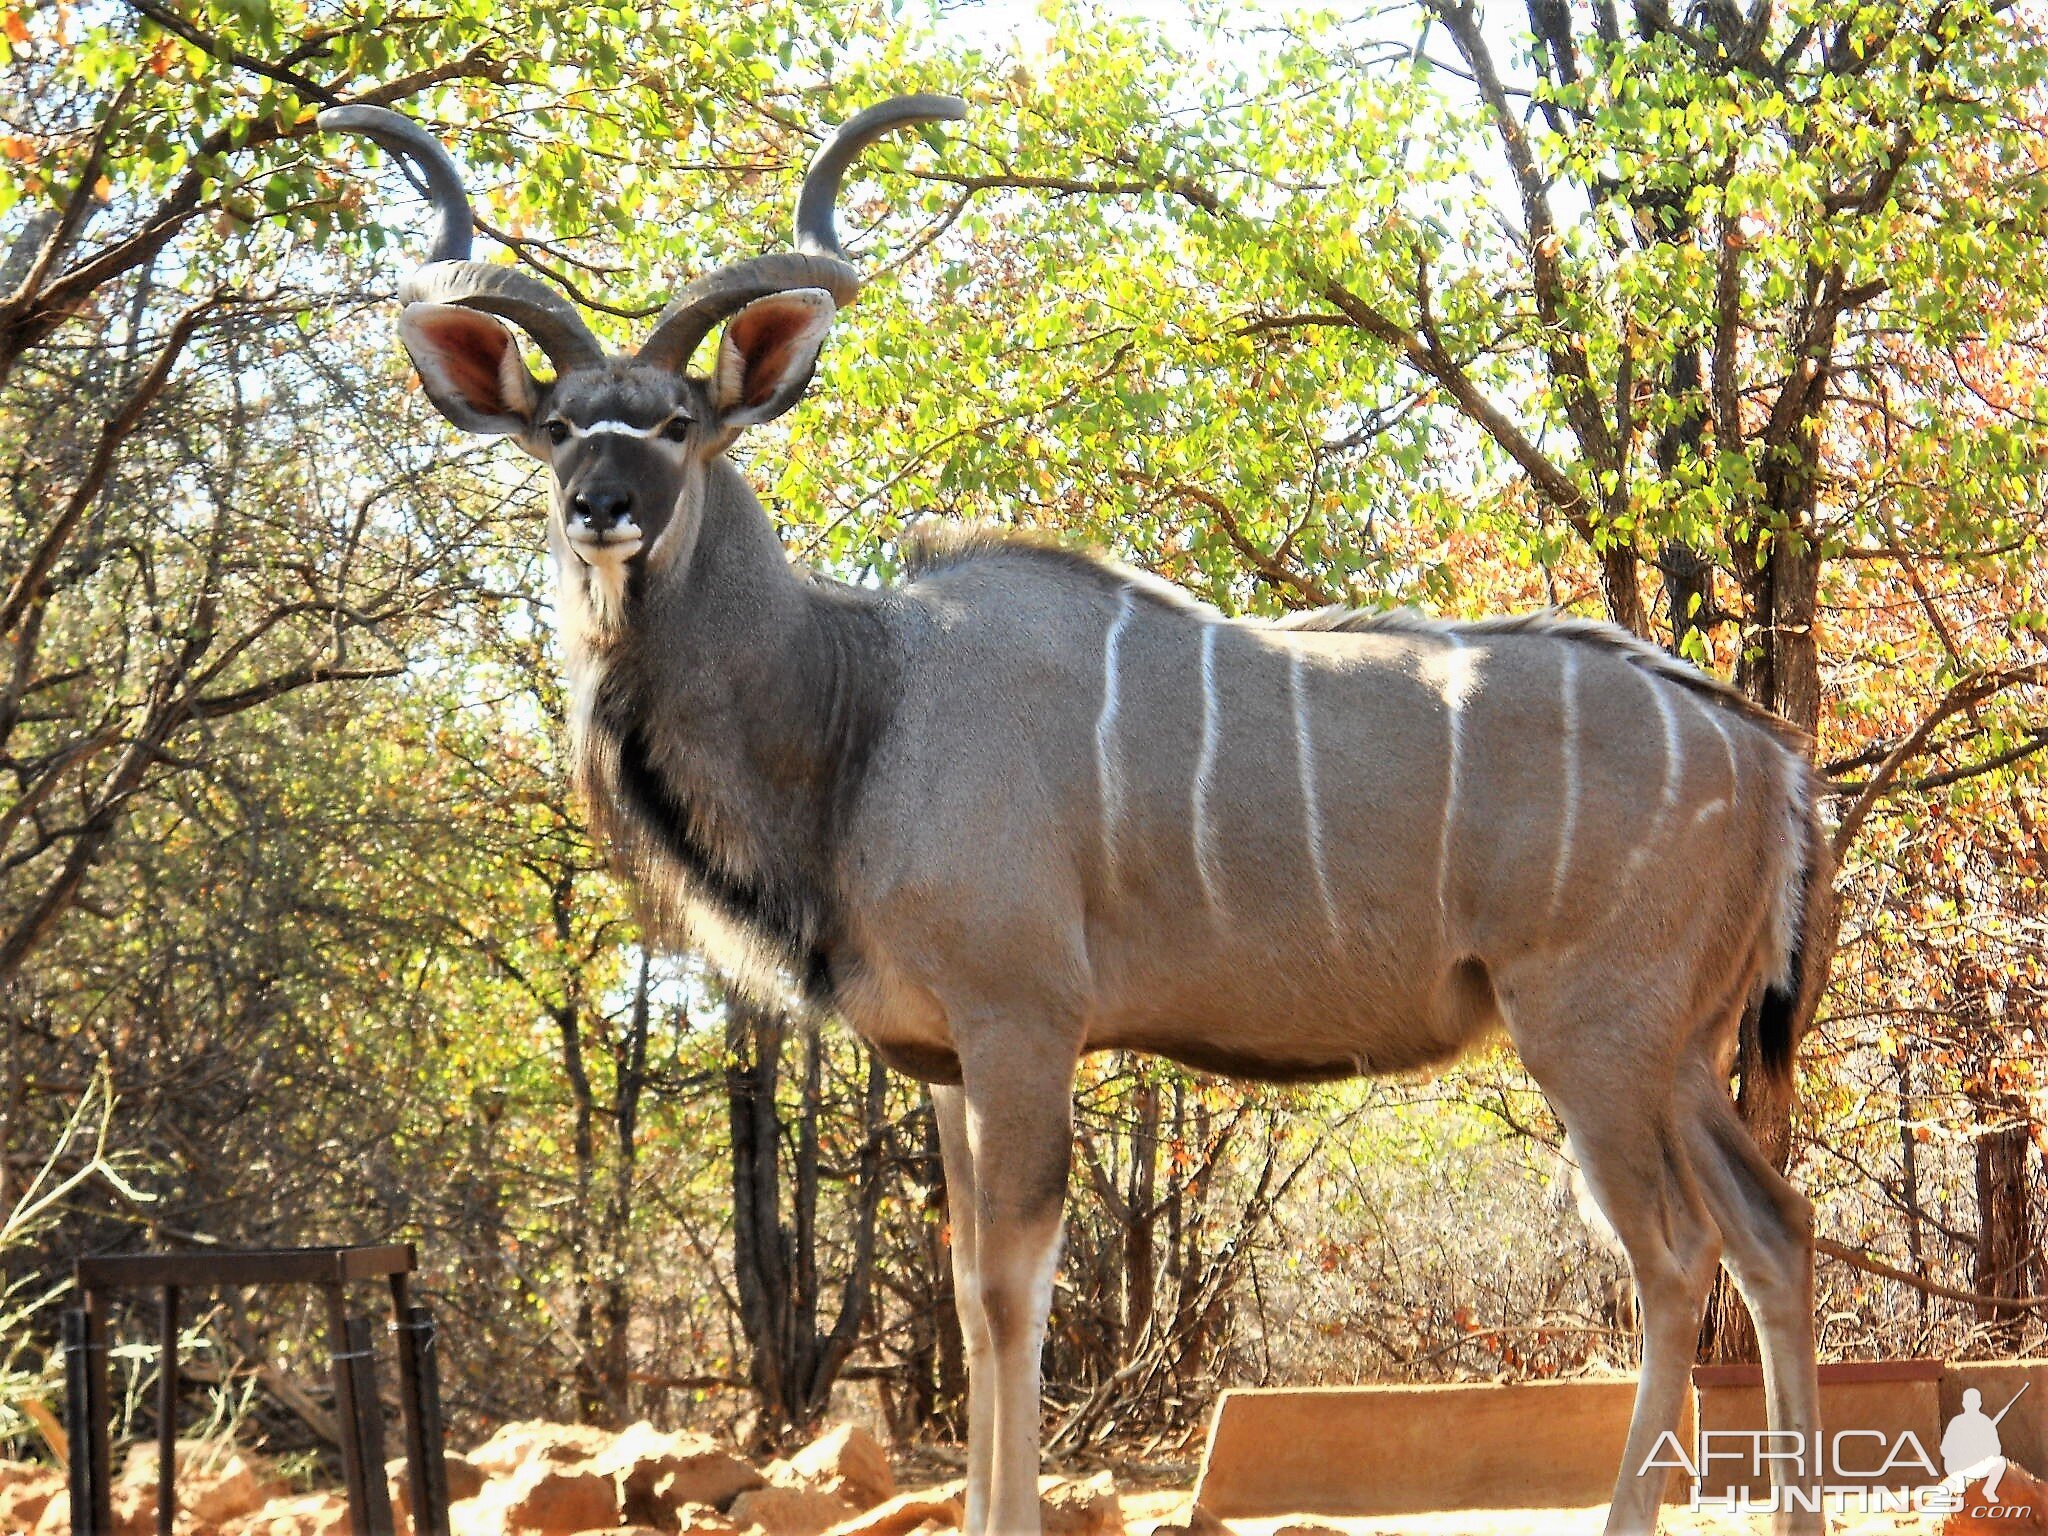 View of Kudu from Hunting Blind